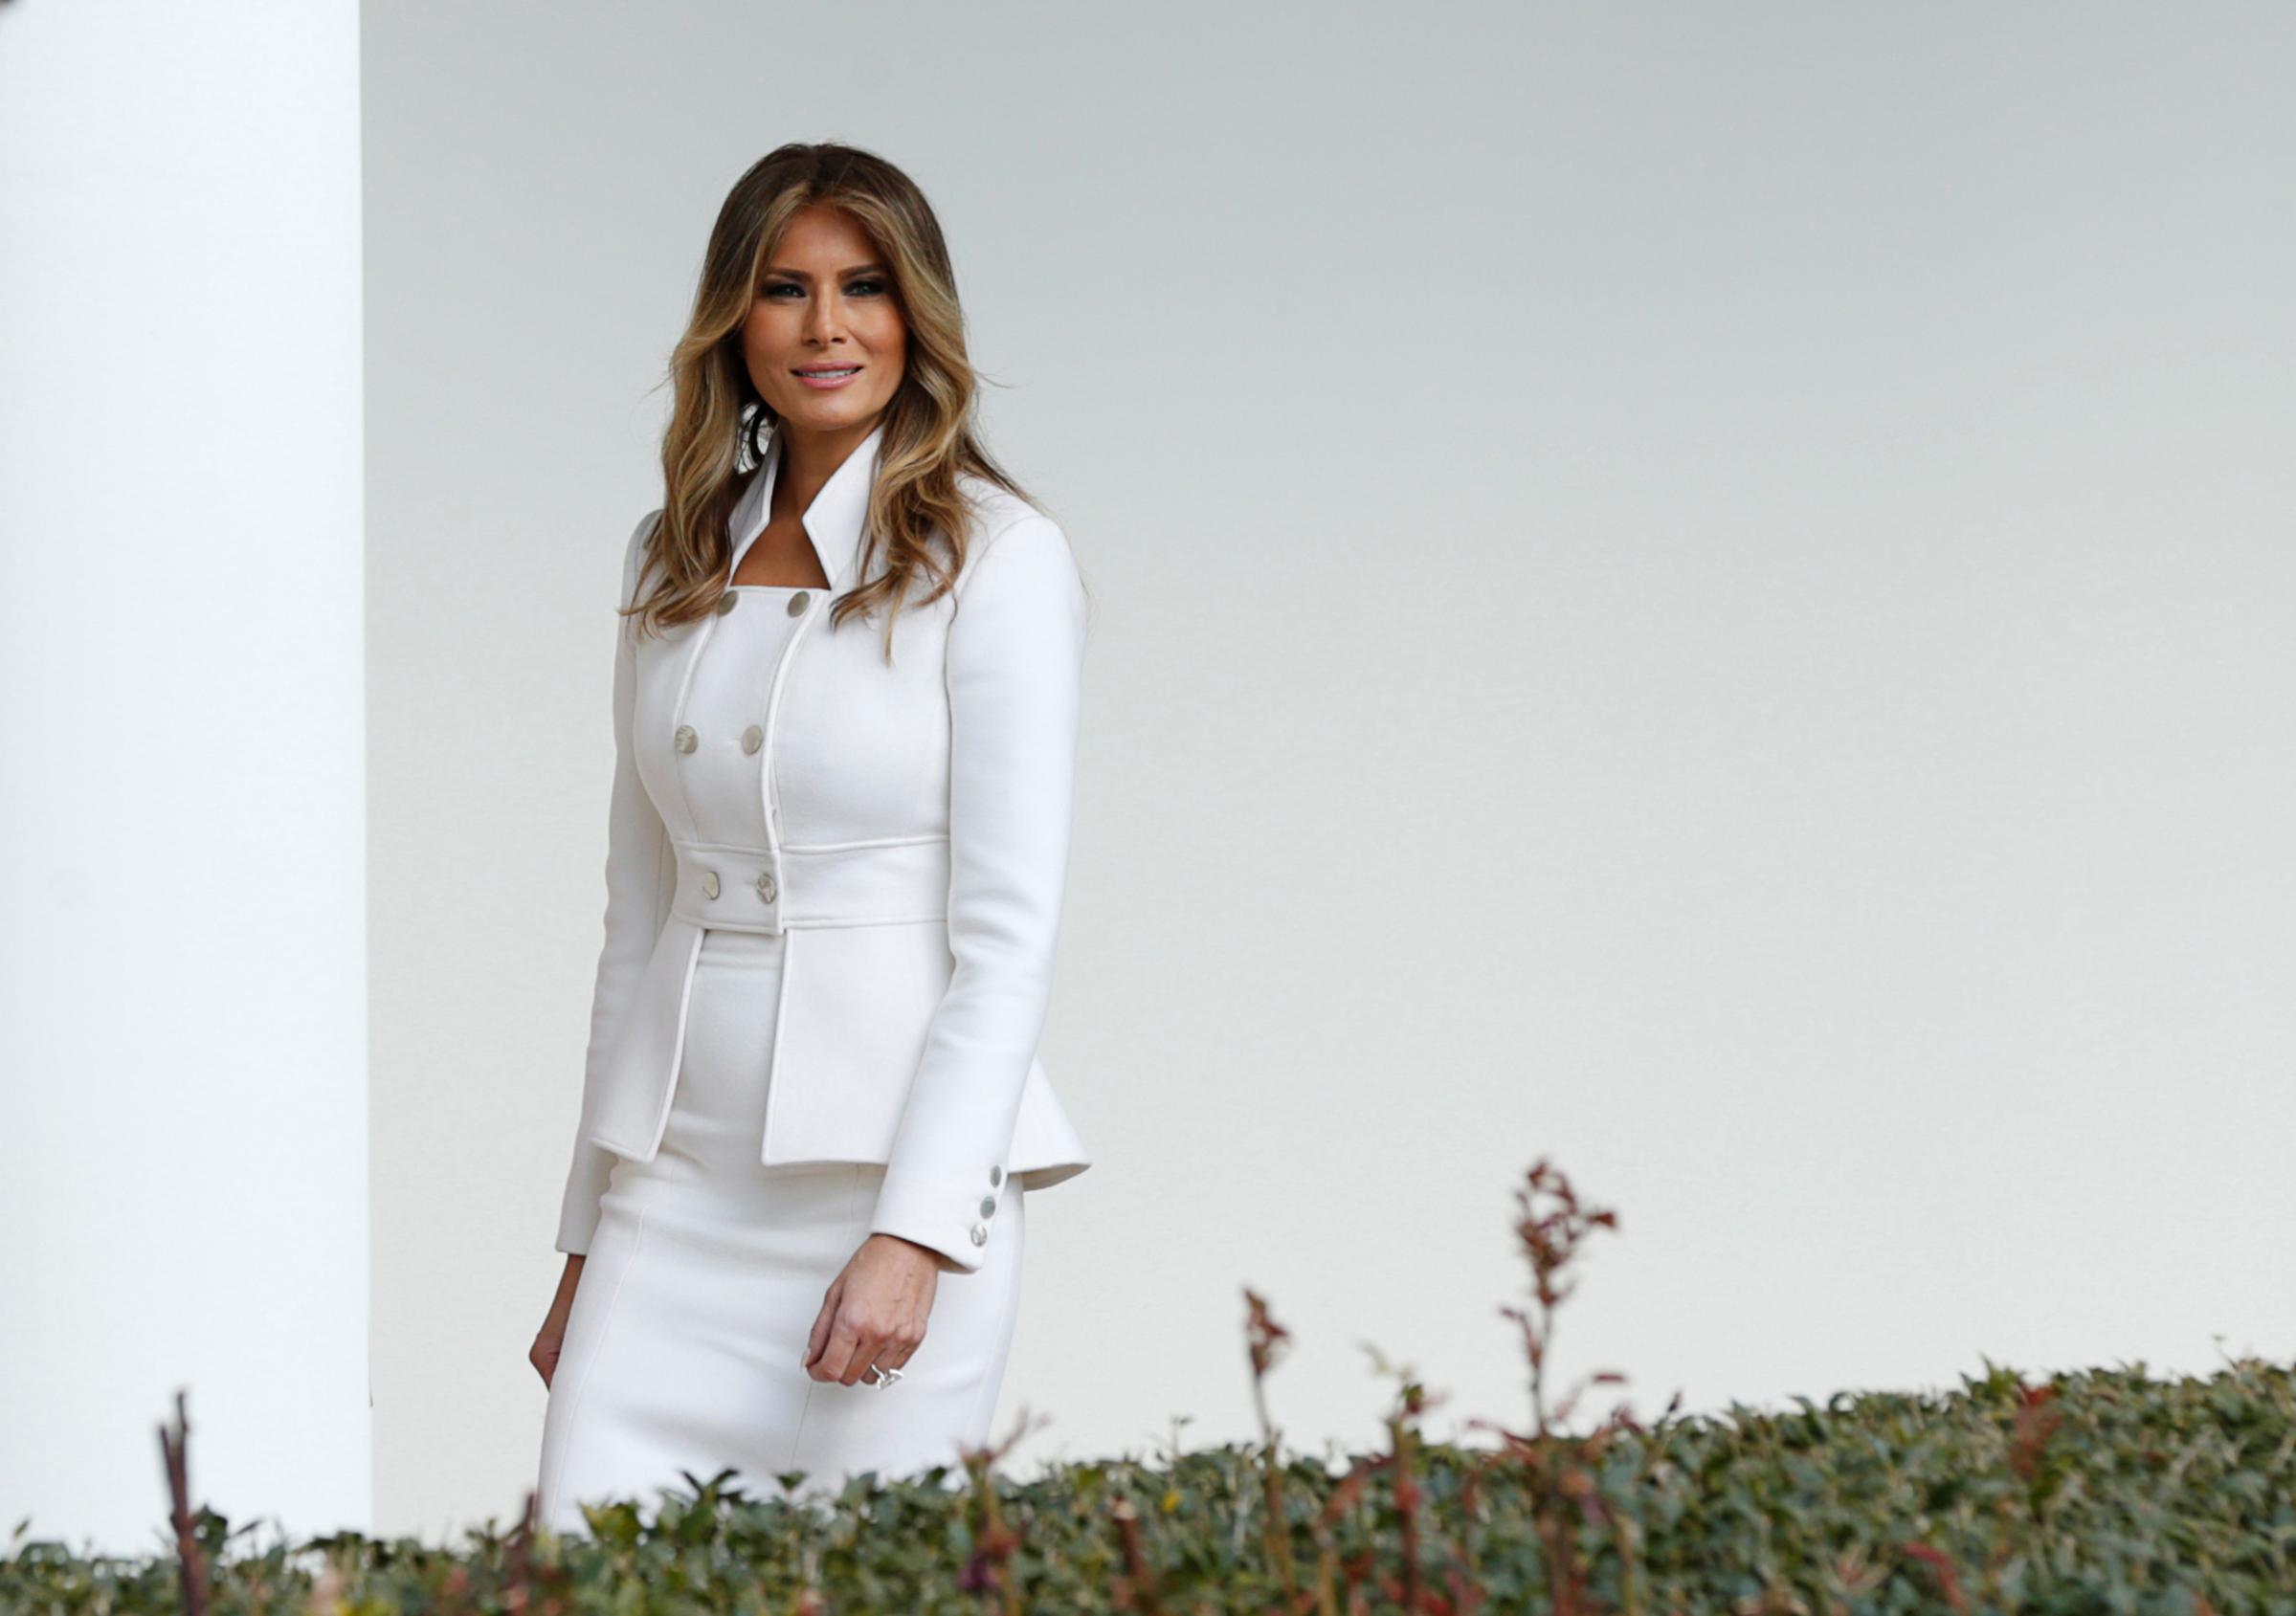 First lady Melania Trump wearing custom Karl lagerfield outfit, walks along the Colonnade at the White House. Feb. 15, 2017.